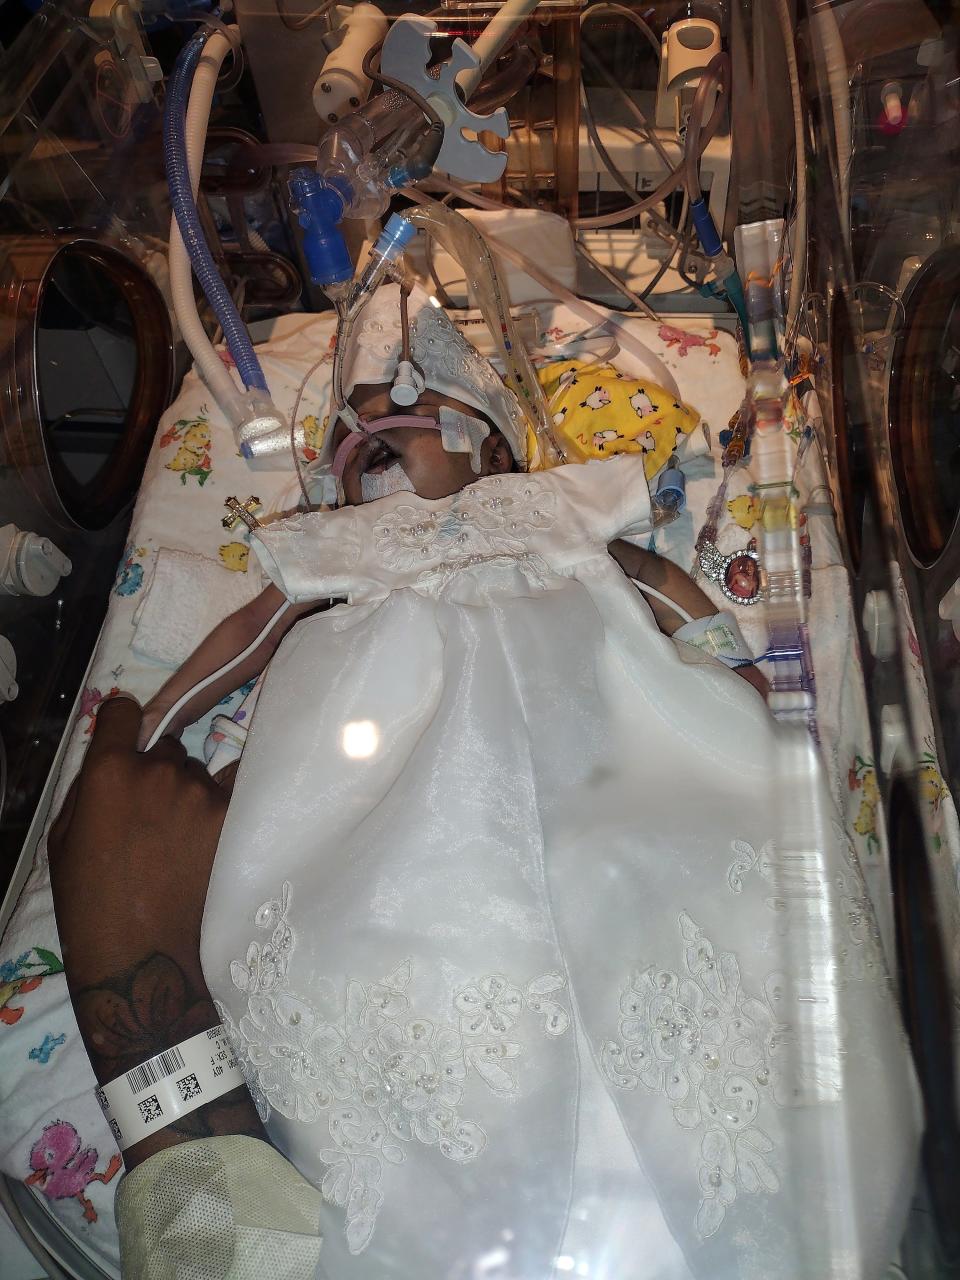 The morning of Sept. 19, 2021, Amillianna Ramirez-Johnson is seen connected to a breathing apparatus and monitoring devices in the neonatal intensive care unit at Columbia St. Mary's Hospital.